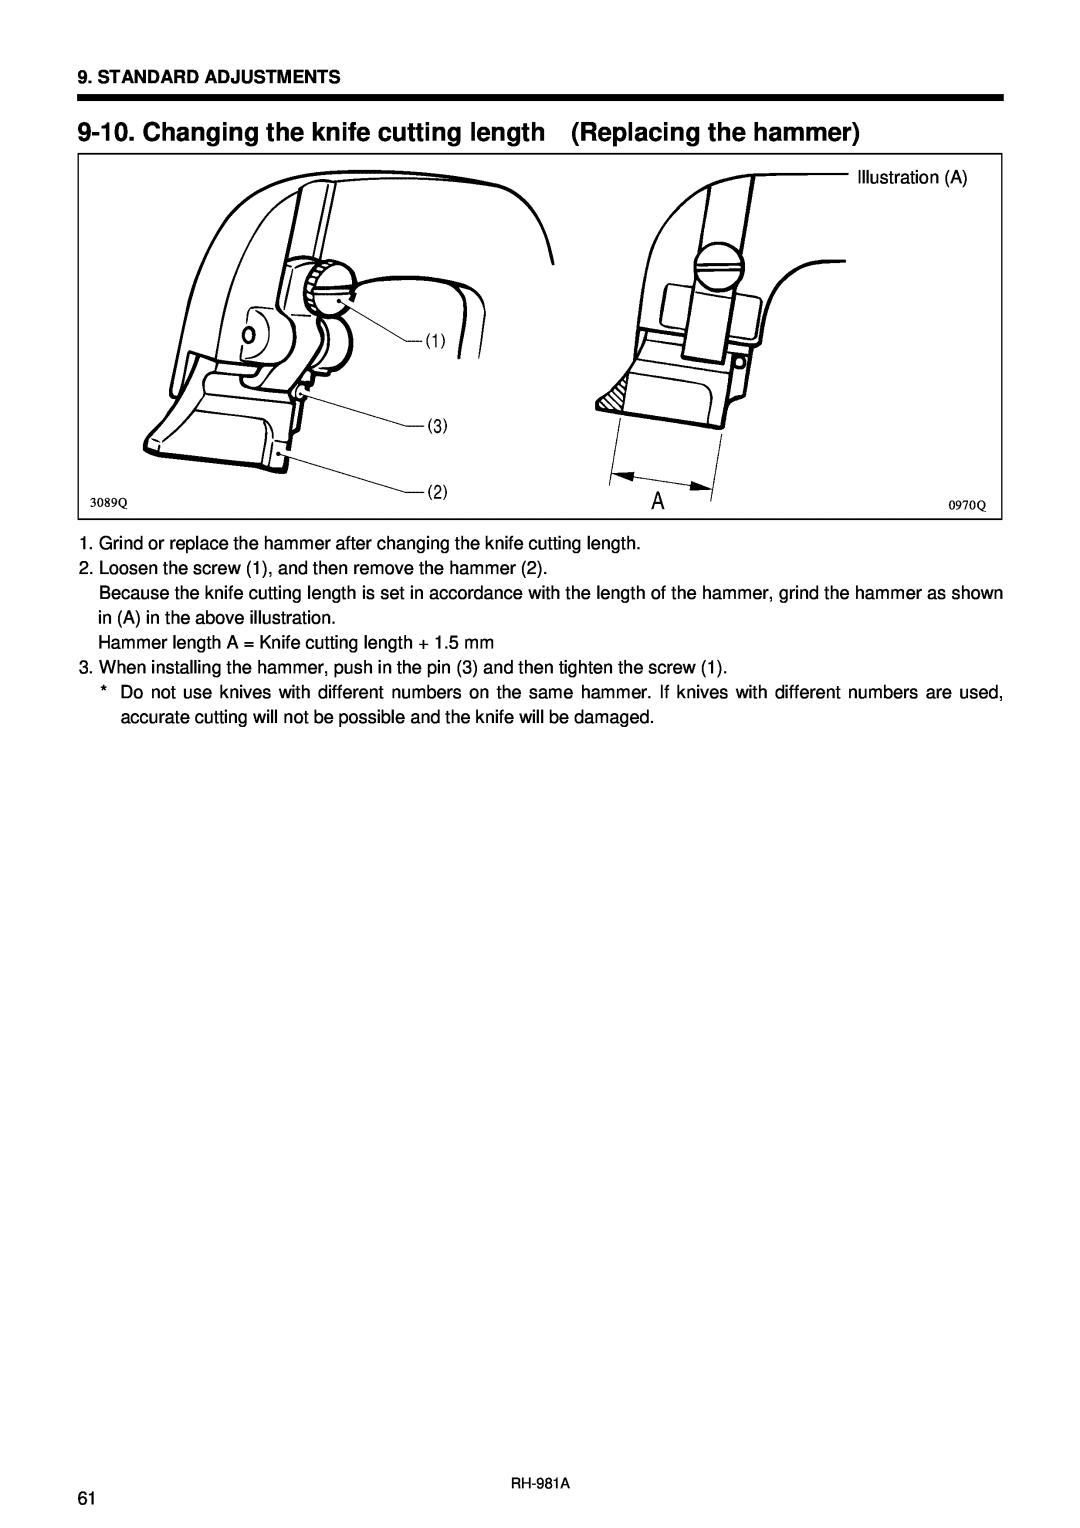 Brother rh-918a manual Changing the knife cutting length Replacing the hammer 